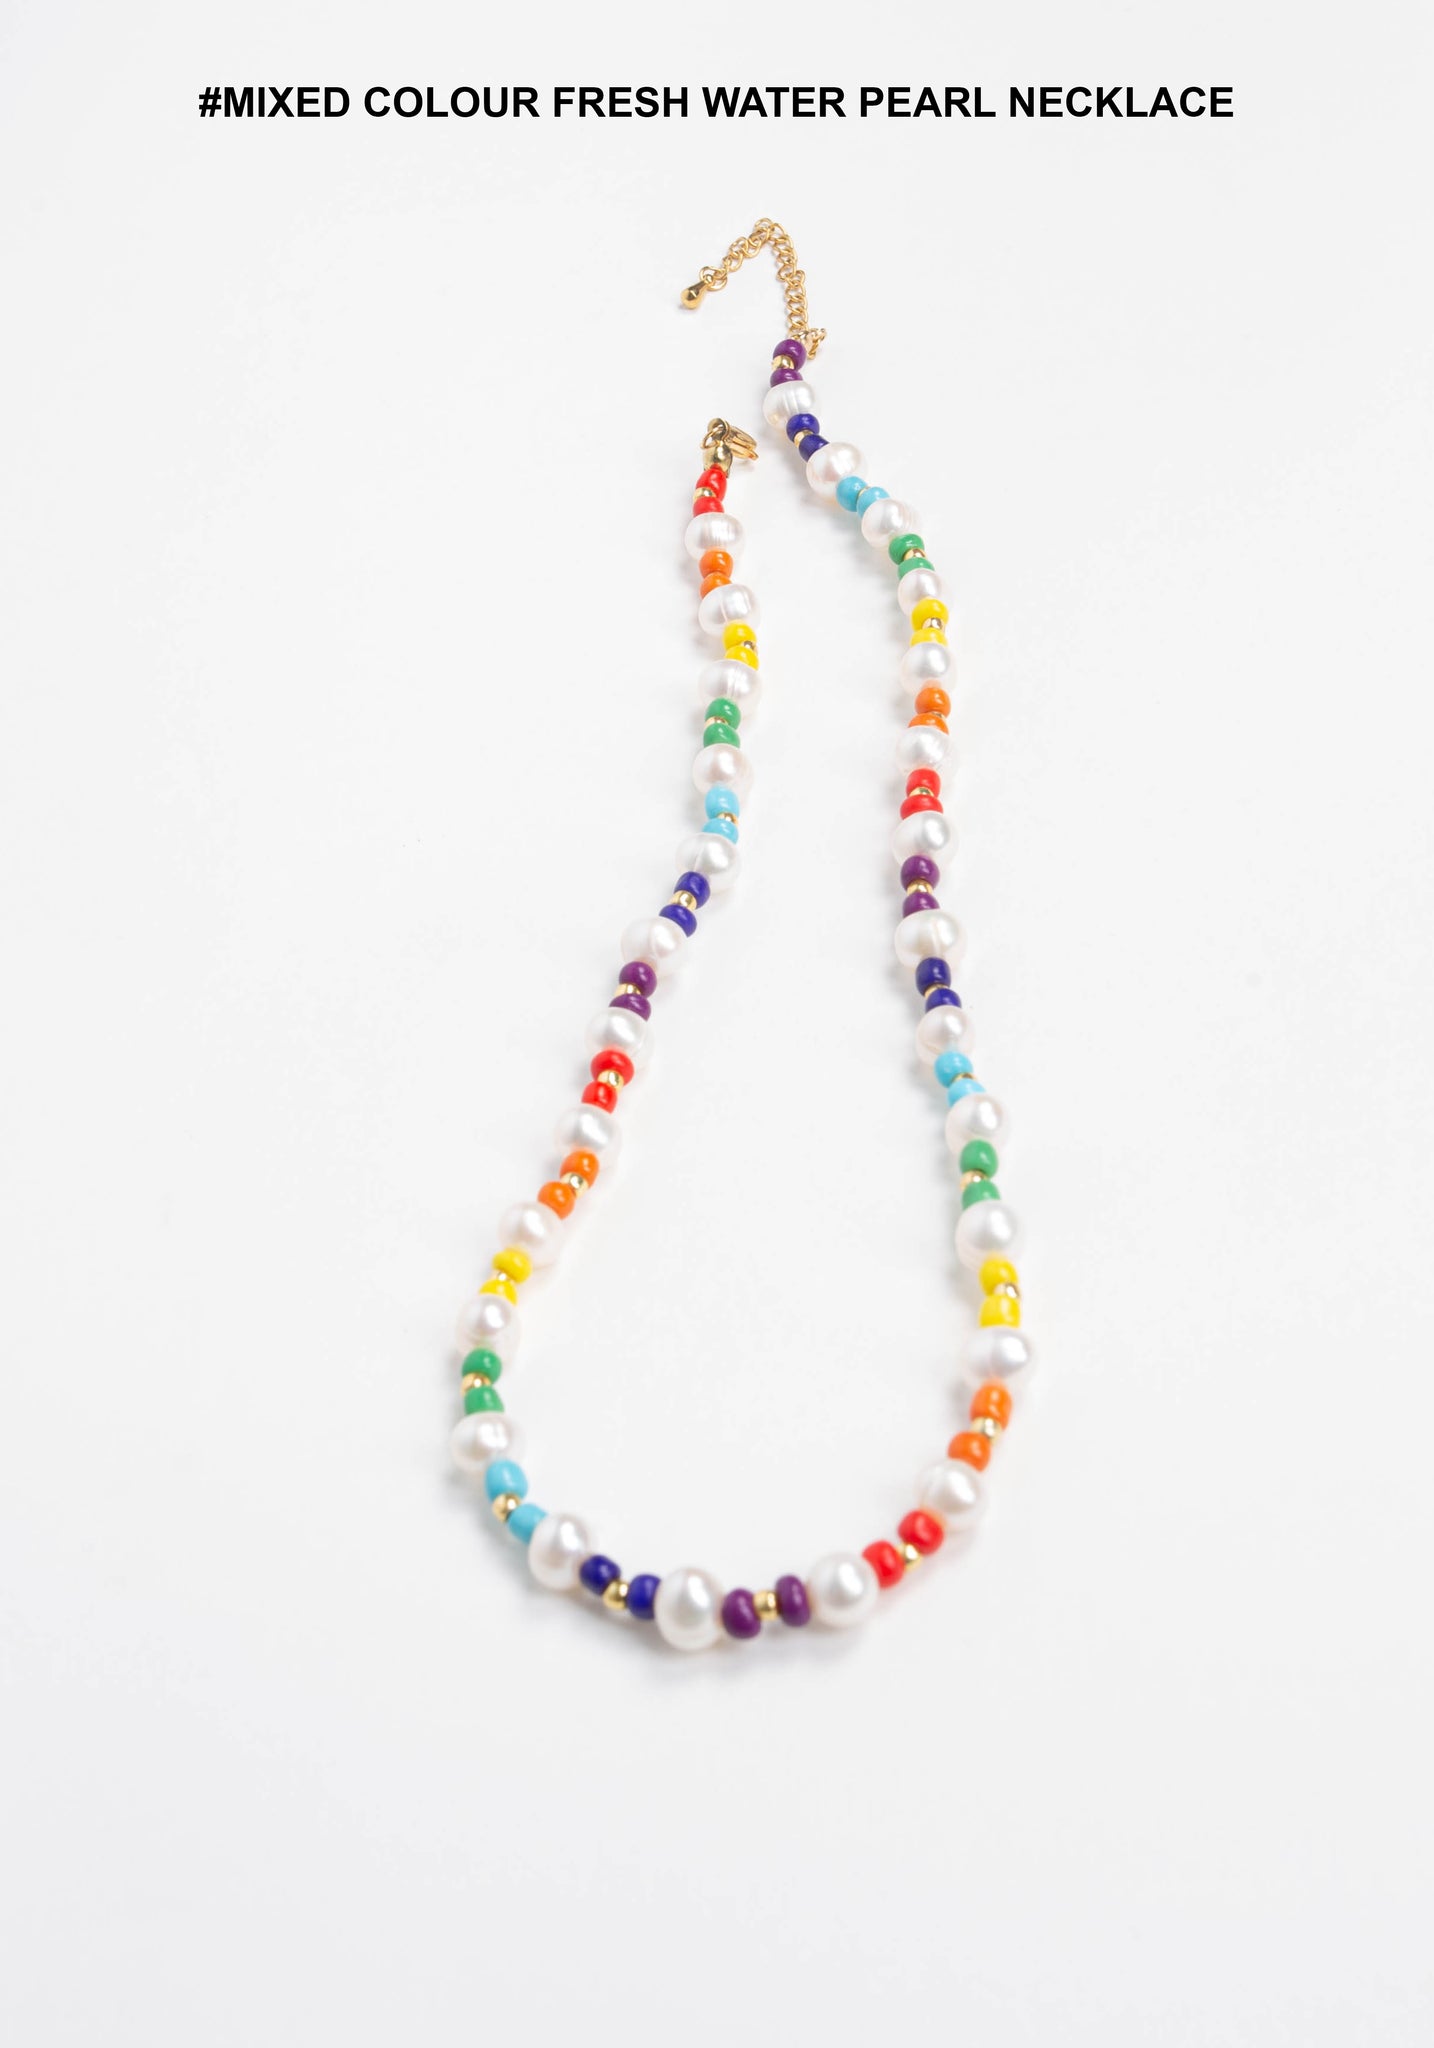 Mixed Colour Fresh Water Pearl Necklace